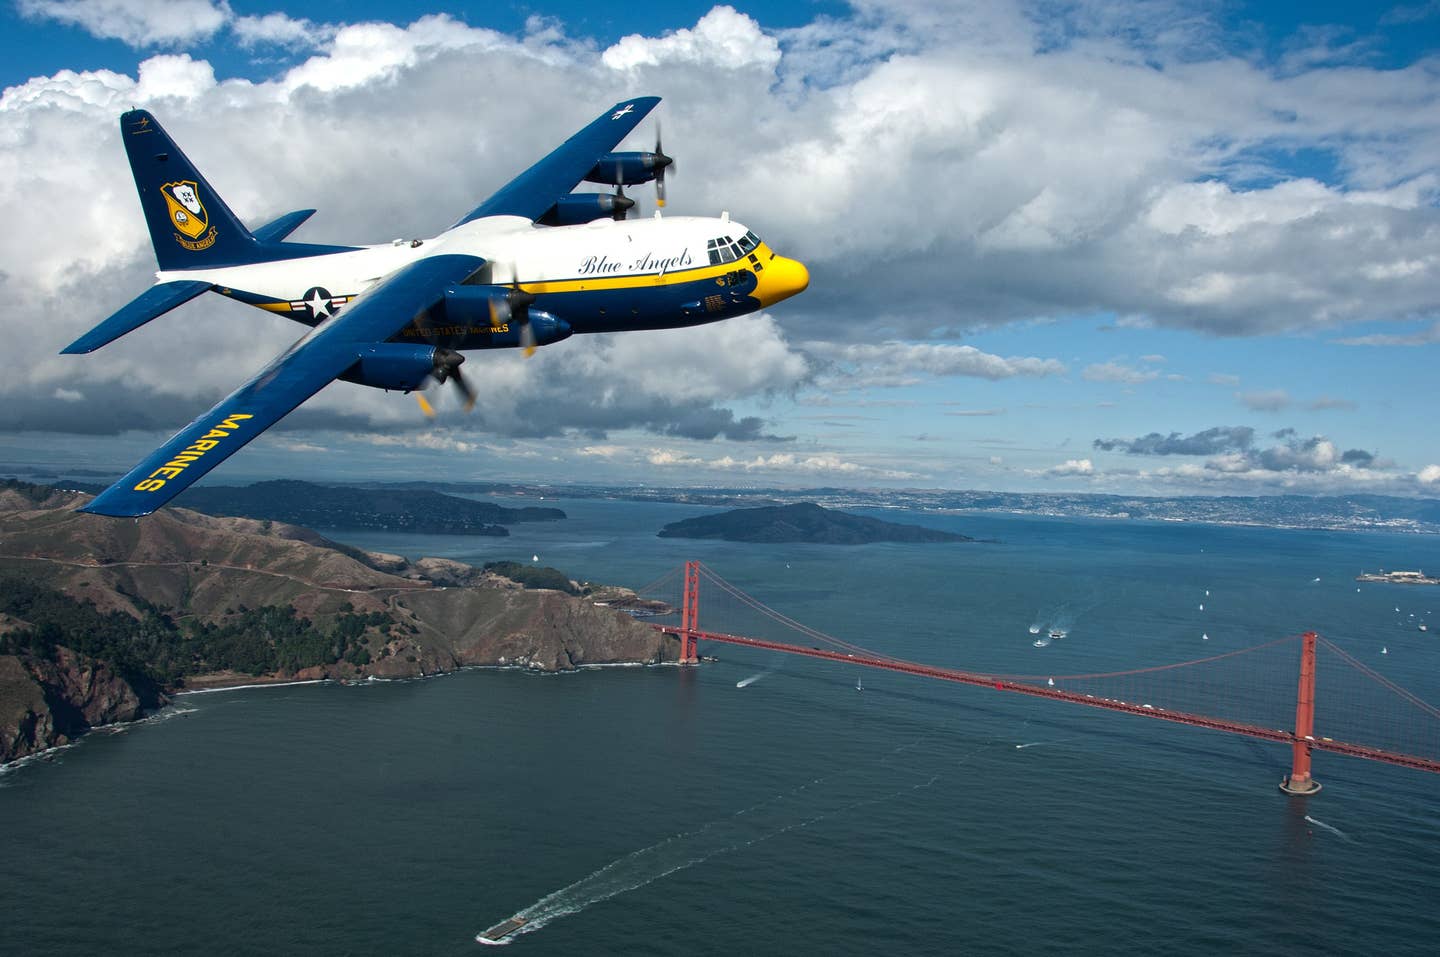 message-editor%2F1558660441832-2560px-fat_albert_the_c-130_hercules_assigned_to_the_u.s._navy_flight_demonstration_squadron_the_blue_angels_flies_over_san_francisco.jpg